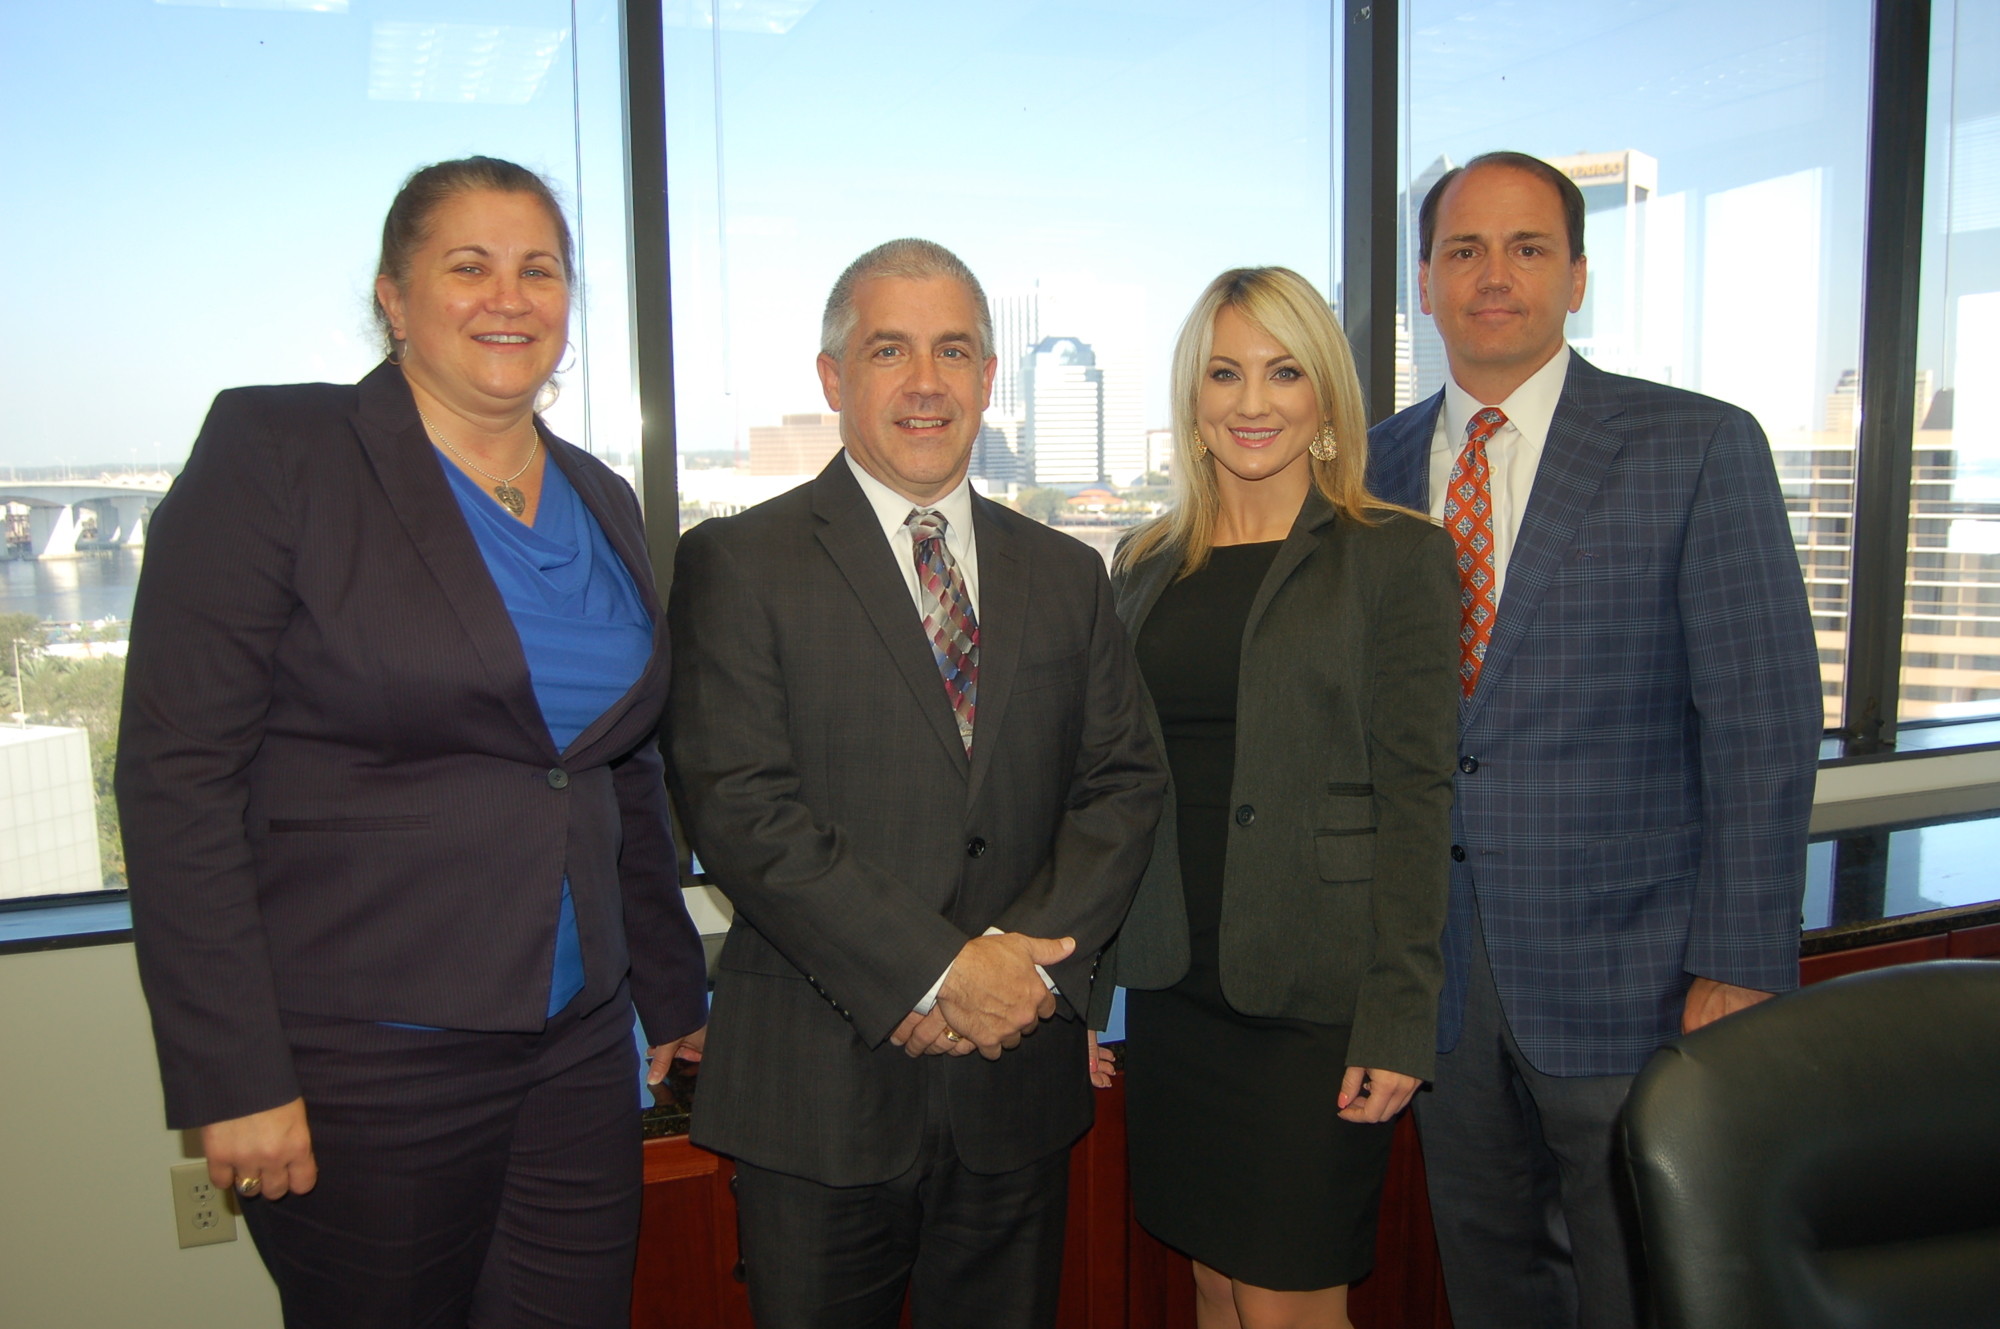 The Jacksonville office of The Truck Accident Law Firm, from left, attorney Heather Solanka, partner Gregg Anderson, attorney Leslie Sloan and Managing Partner Joseph Camerlengo.